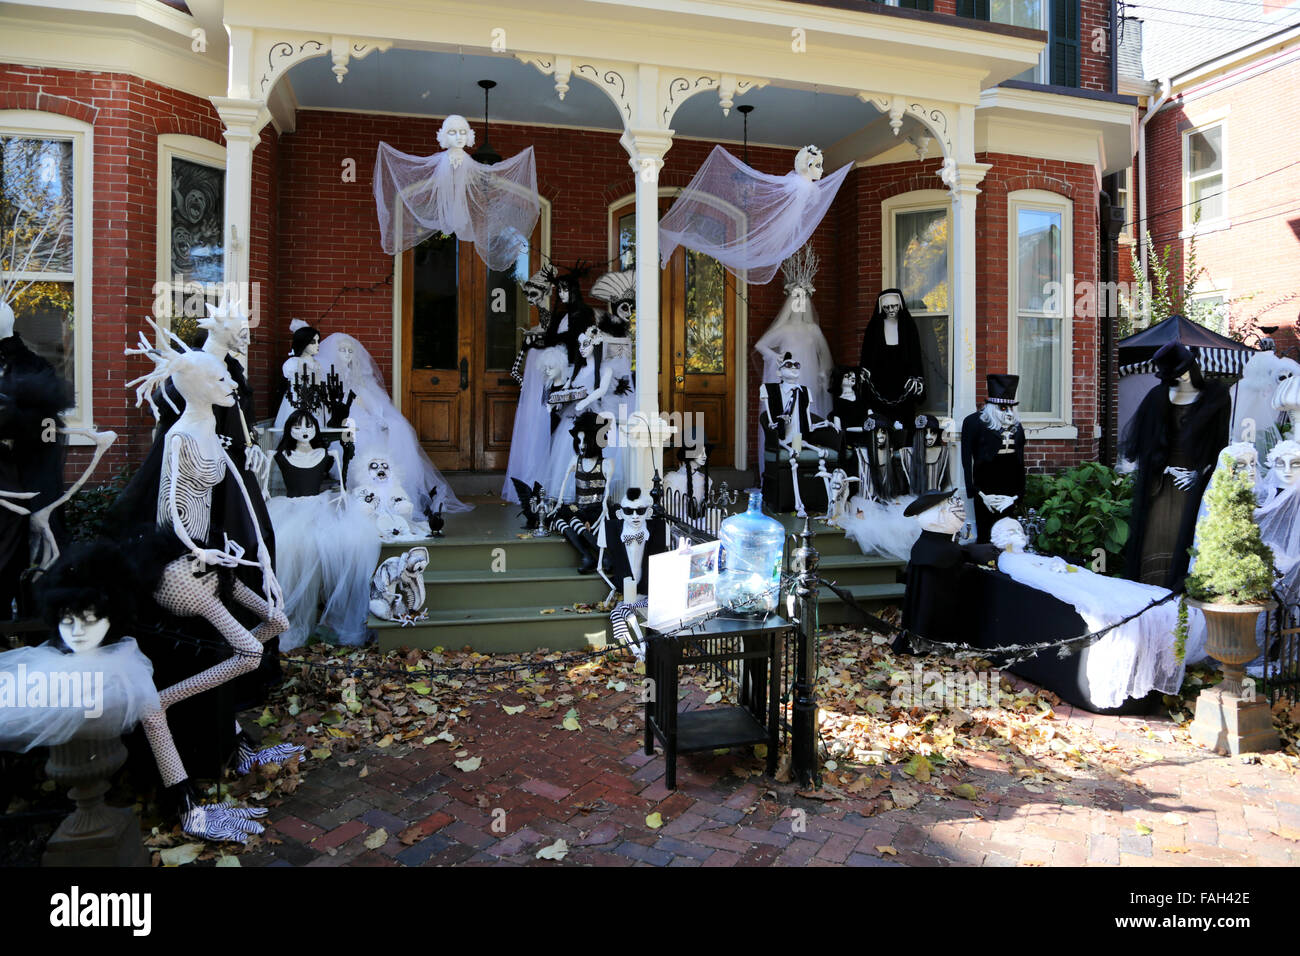 The front of a house decked with lots of life size figures and models as part of an impressive Beetle juice style Halloween decoration Stock Photo